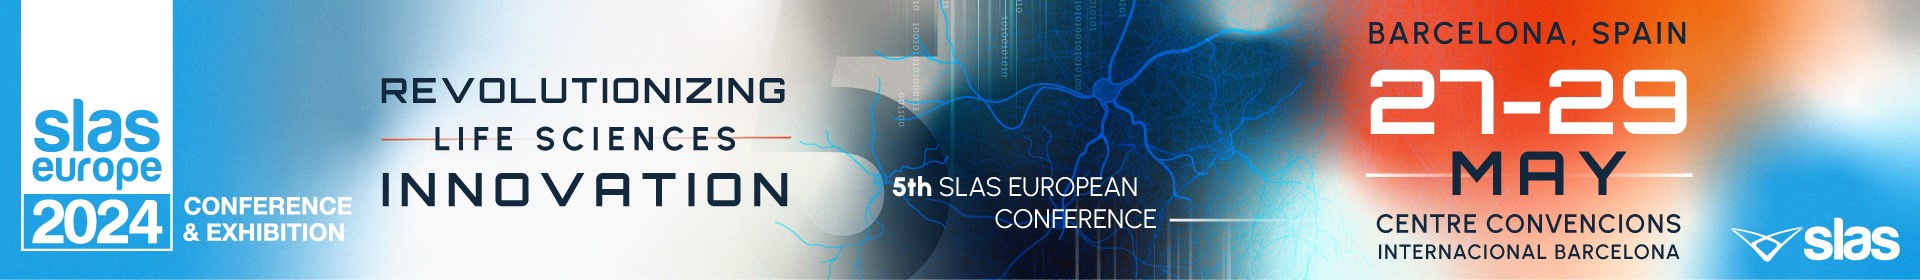 SLAS Europe 2024 Conference & Exhibition Event Banner